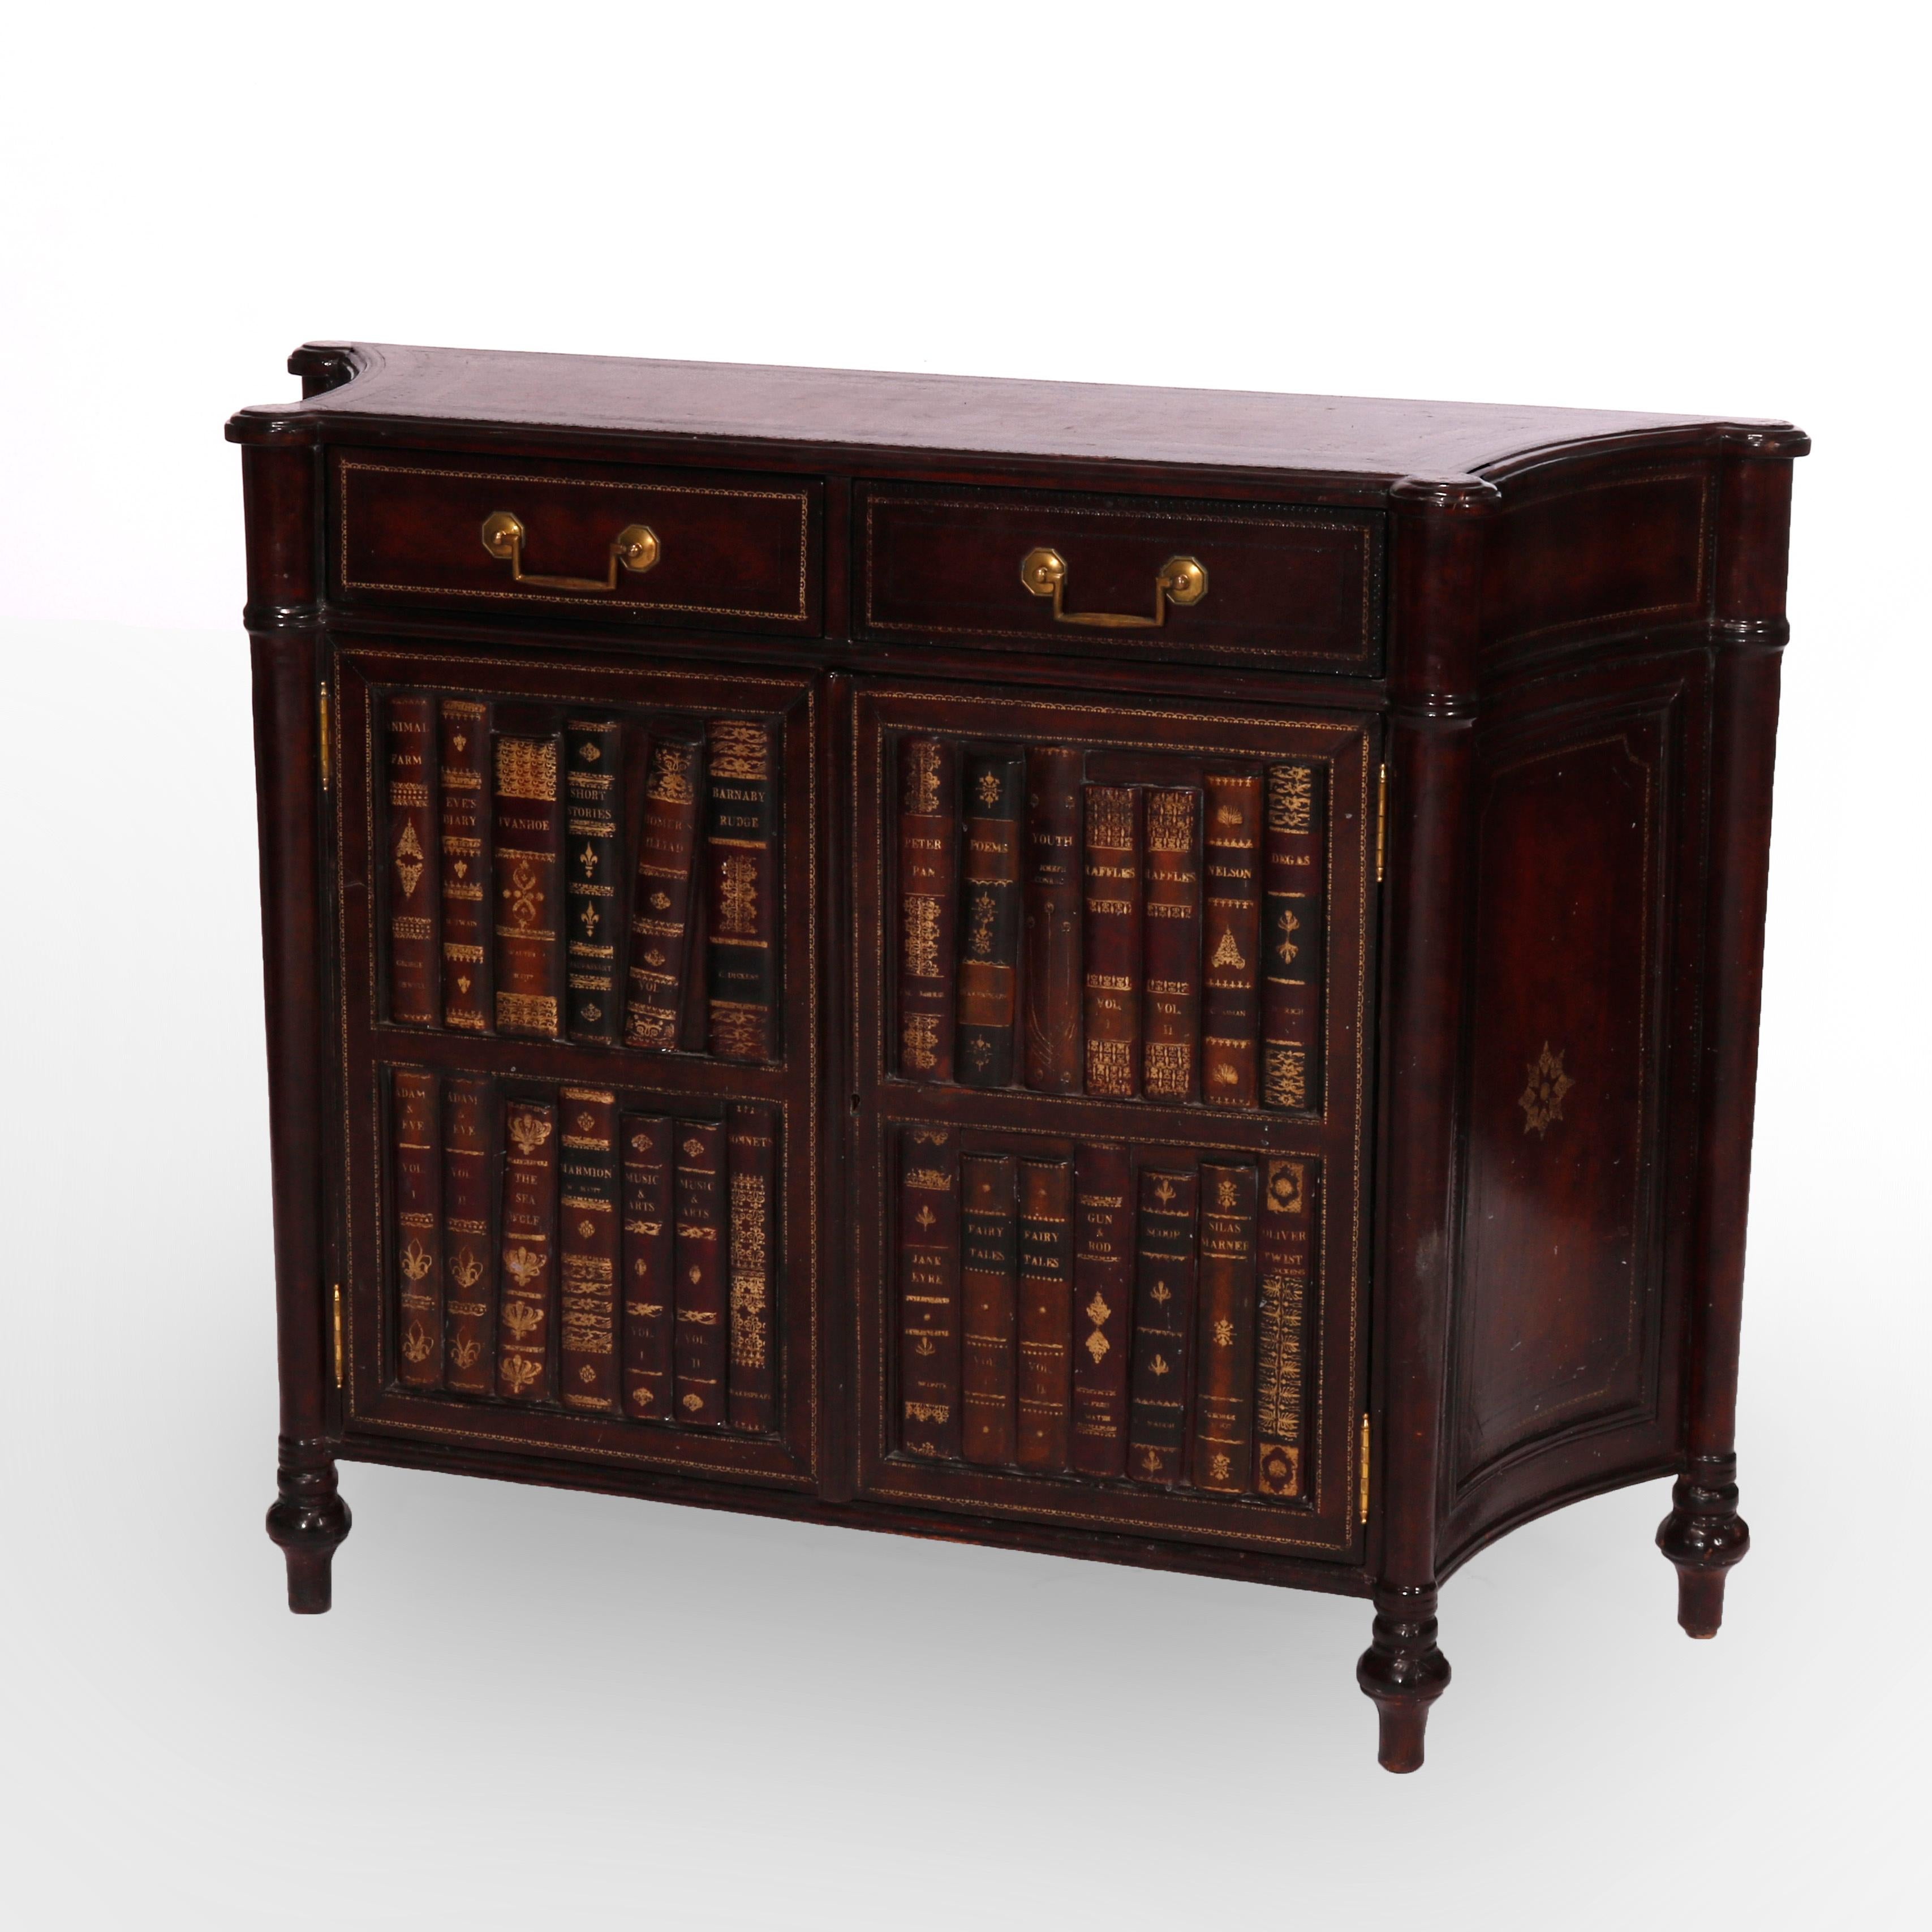 A commode by Maitland Smith offers walnut construction in stylized demilune form with gilt decorated leather top over case with double drawers and lower cabinet with tooled and gilt leather faux library book facing, raised on Mersailles bun feet,